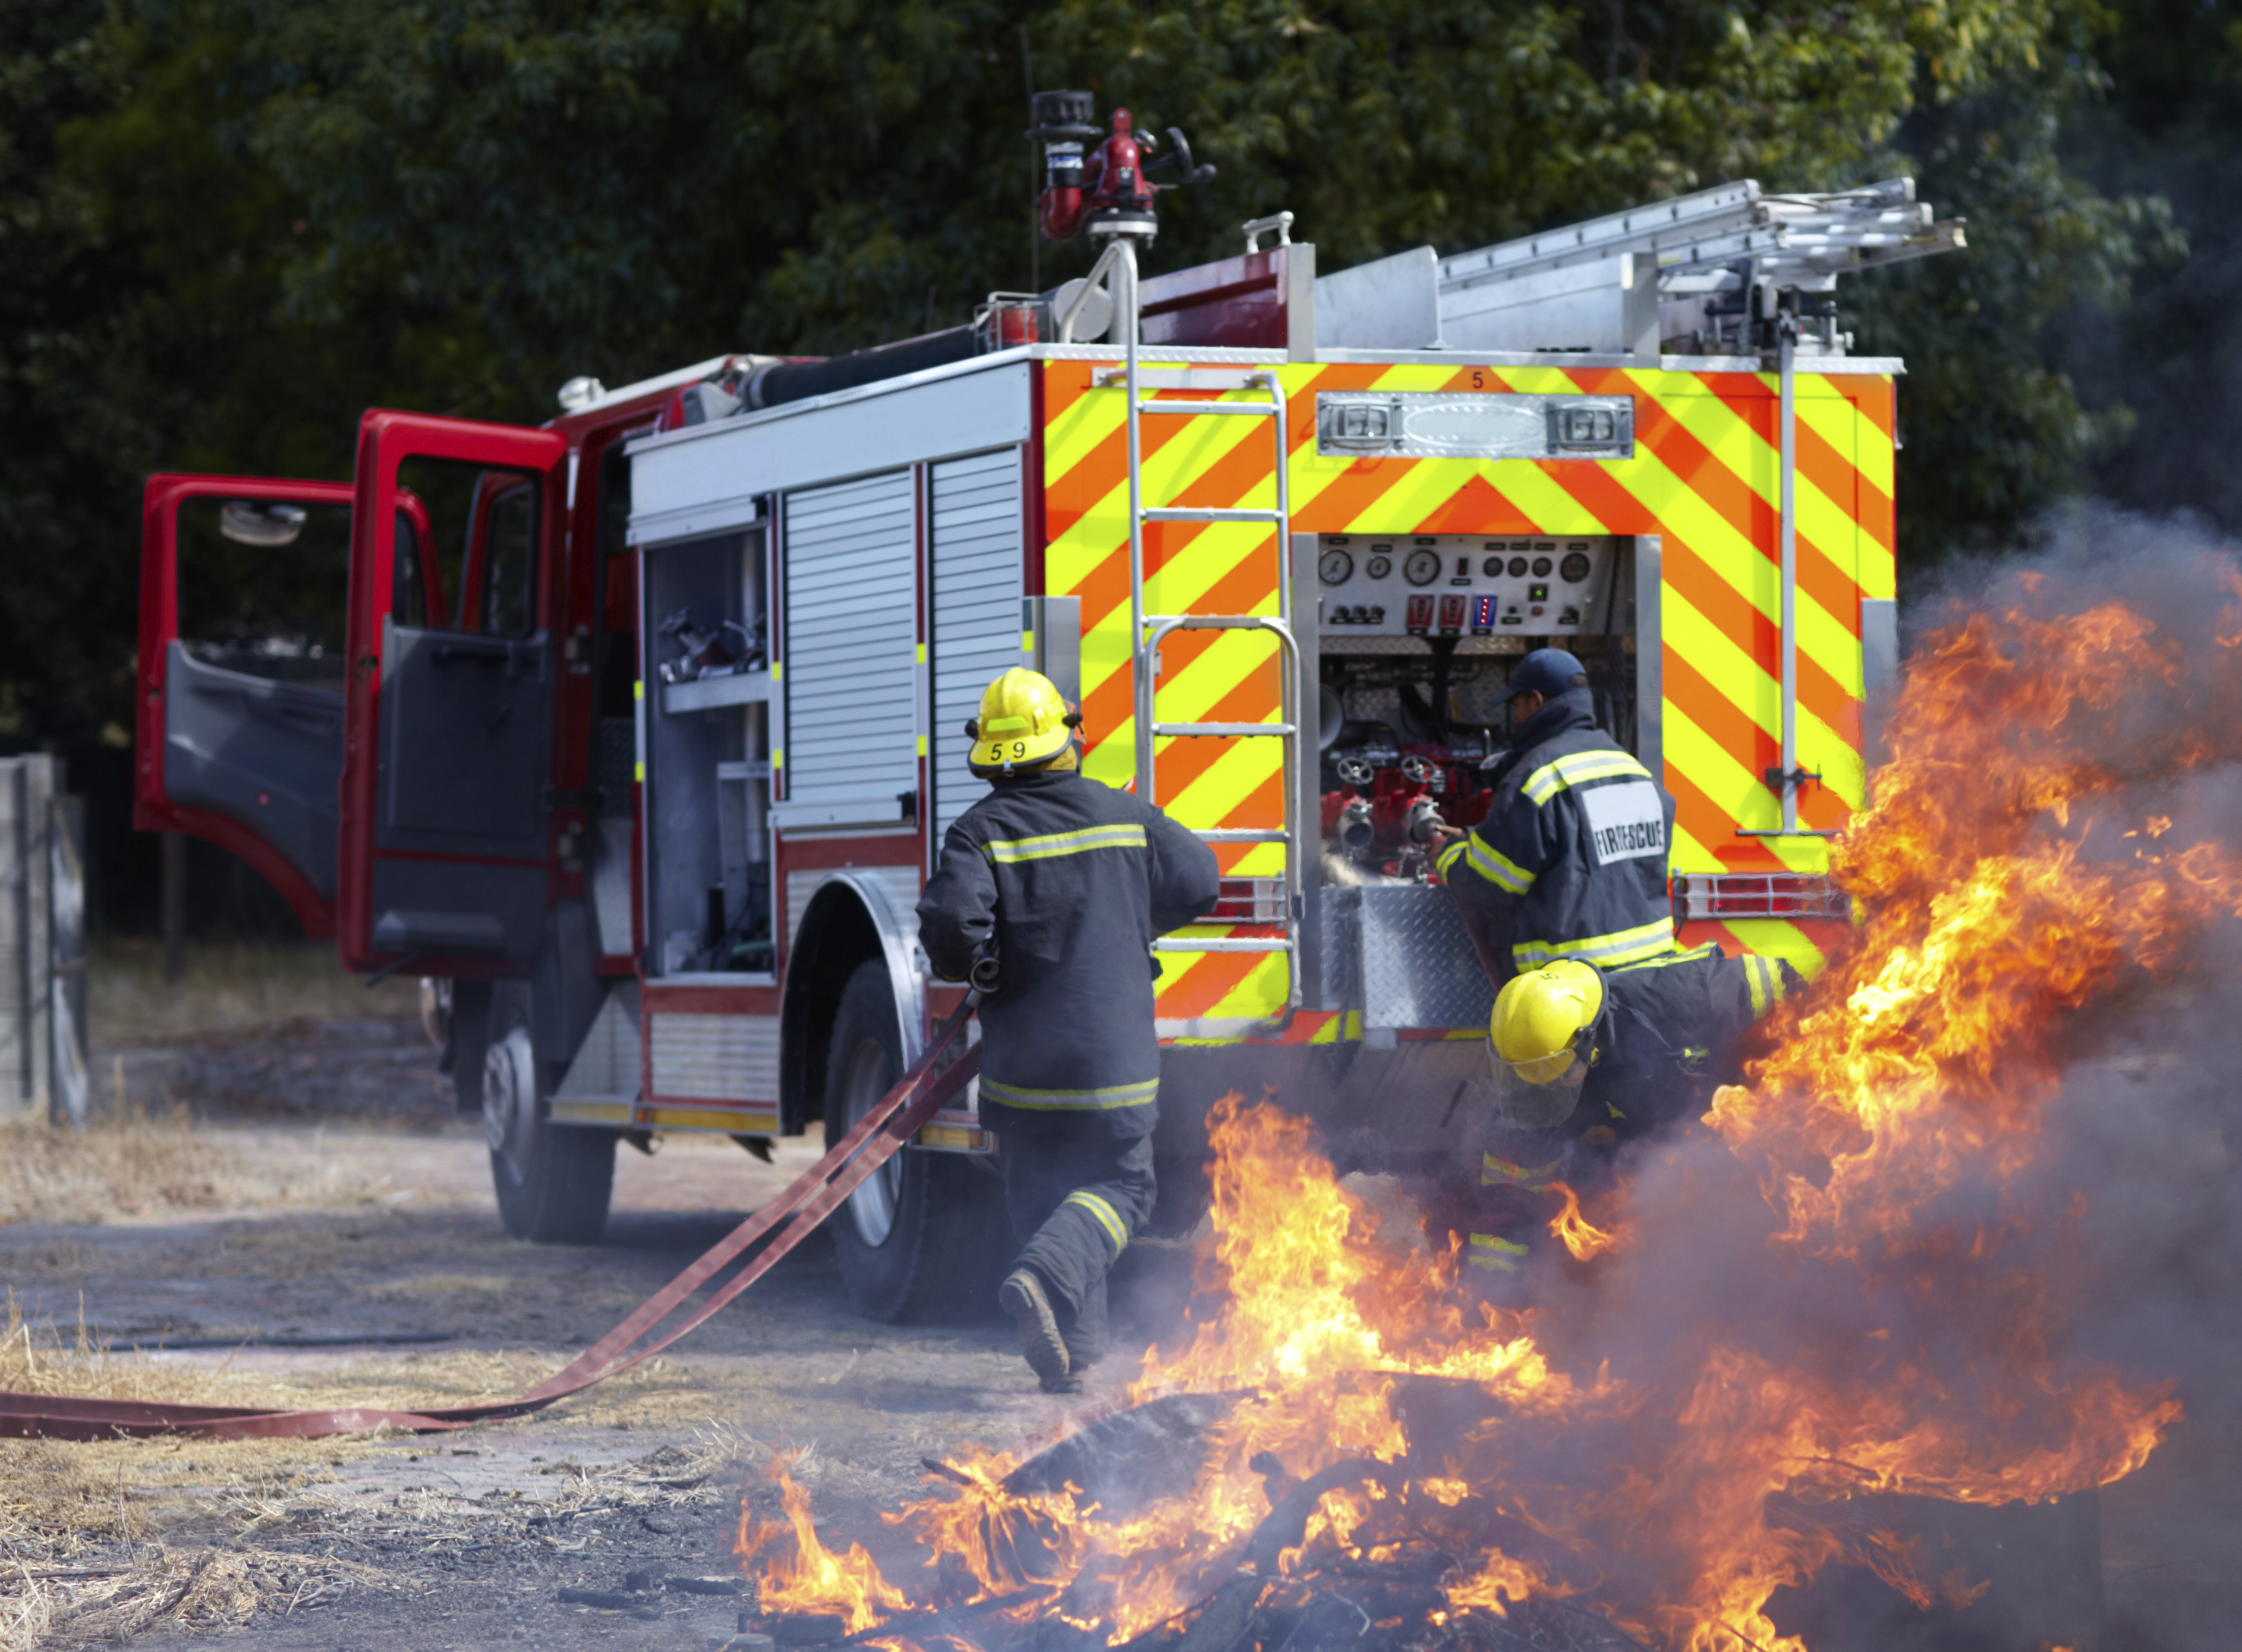 Firefighters across Scotland had responded to more than 600 incidents by 11pm.